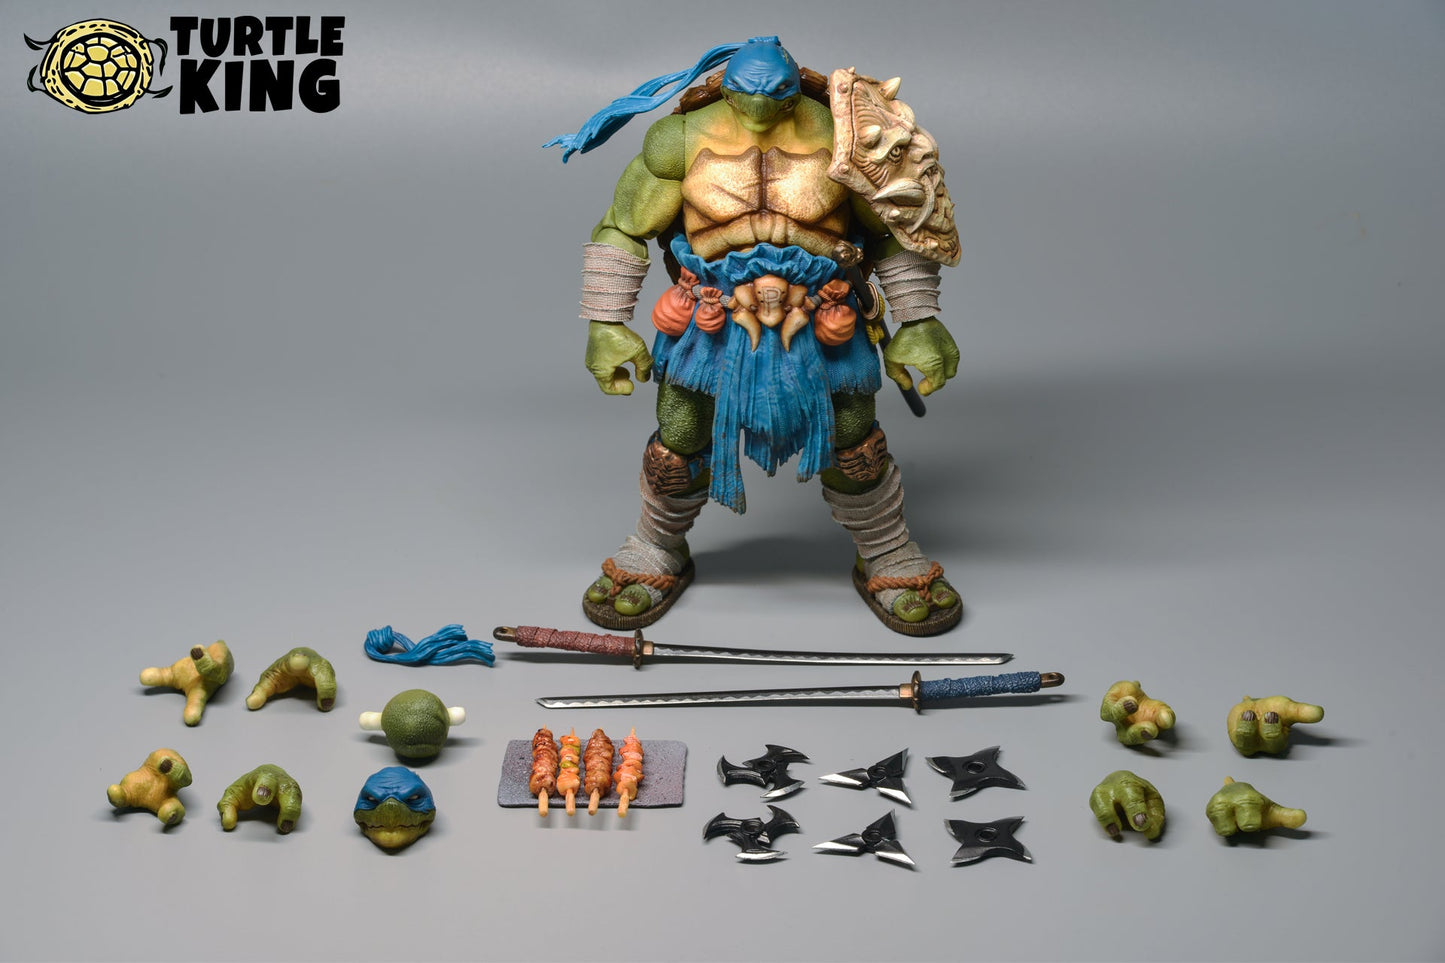 Turtle King TK-001 Rogue Knight 7-inch Action Figure